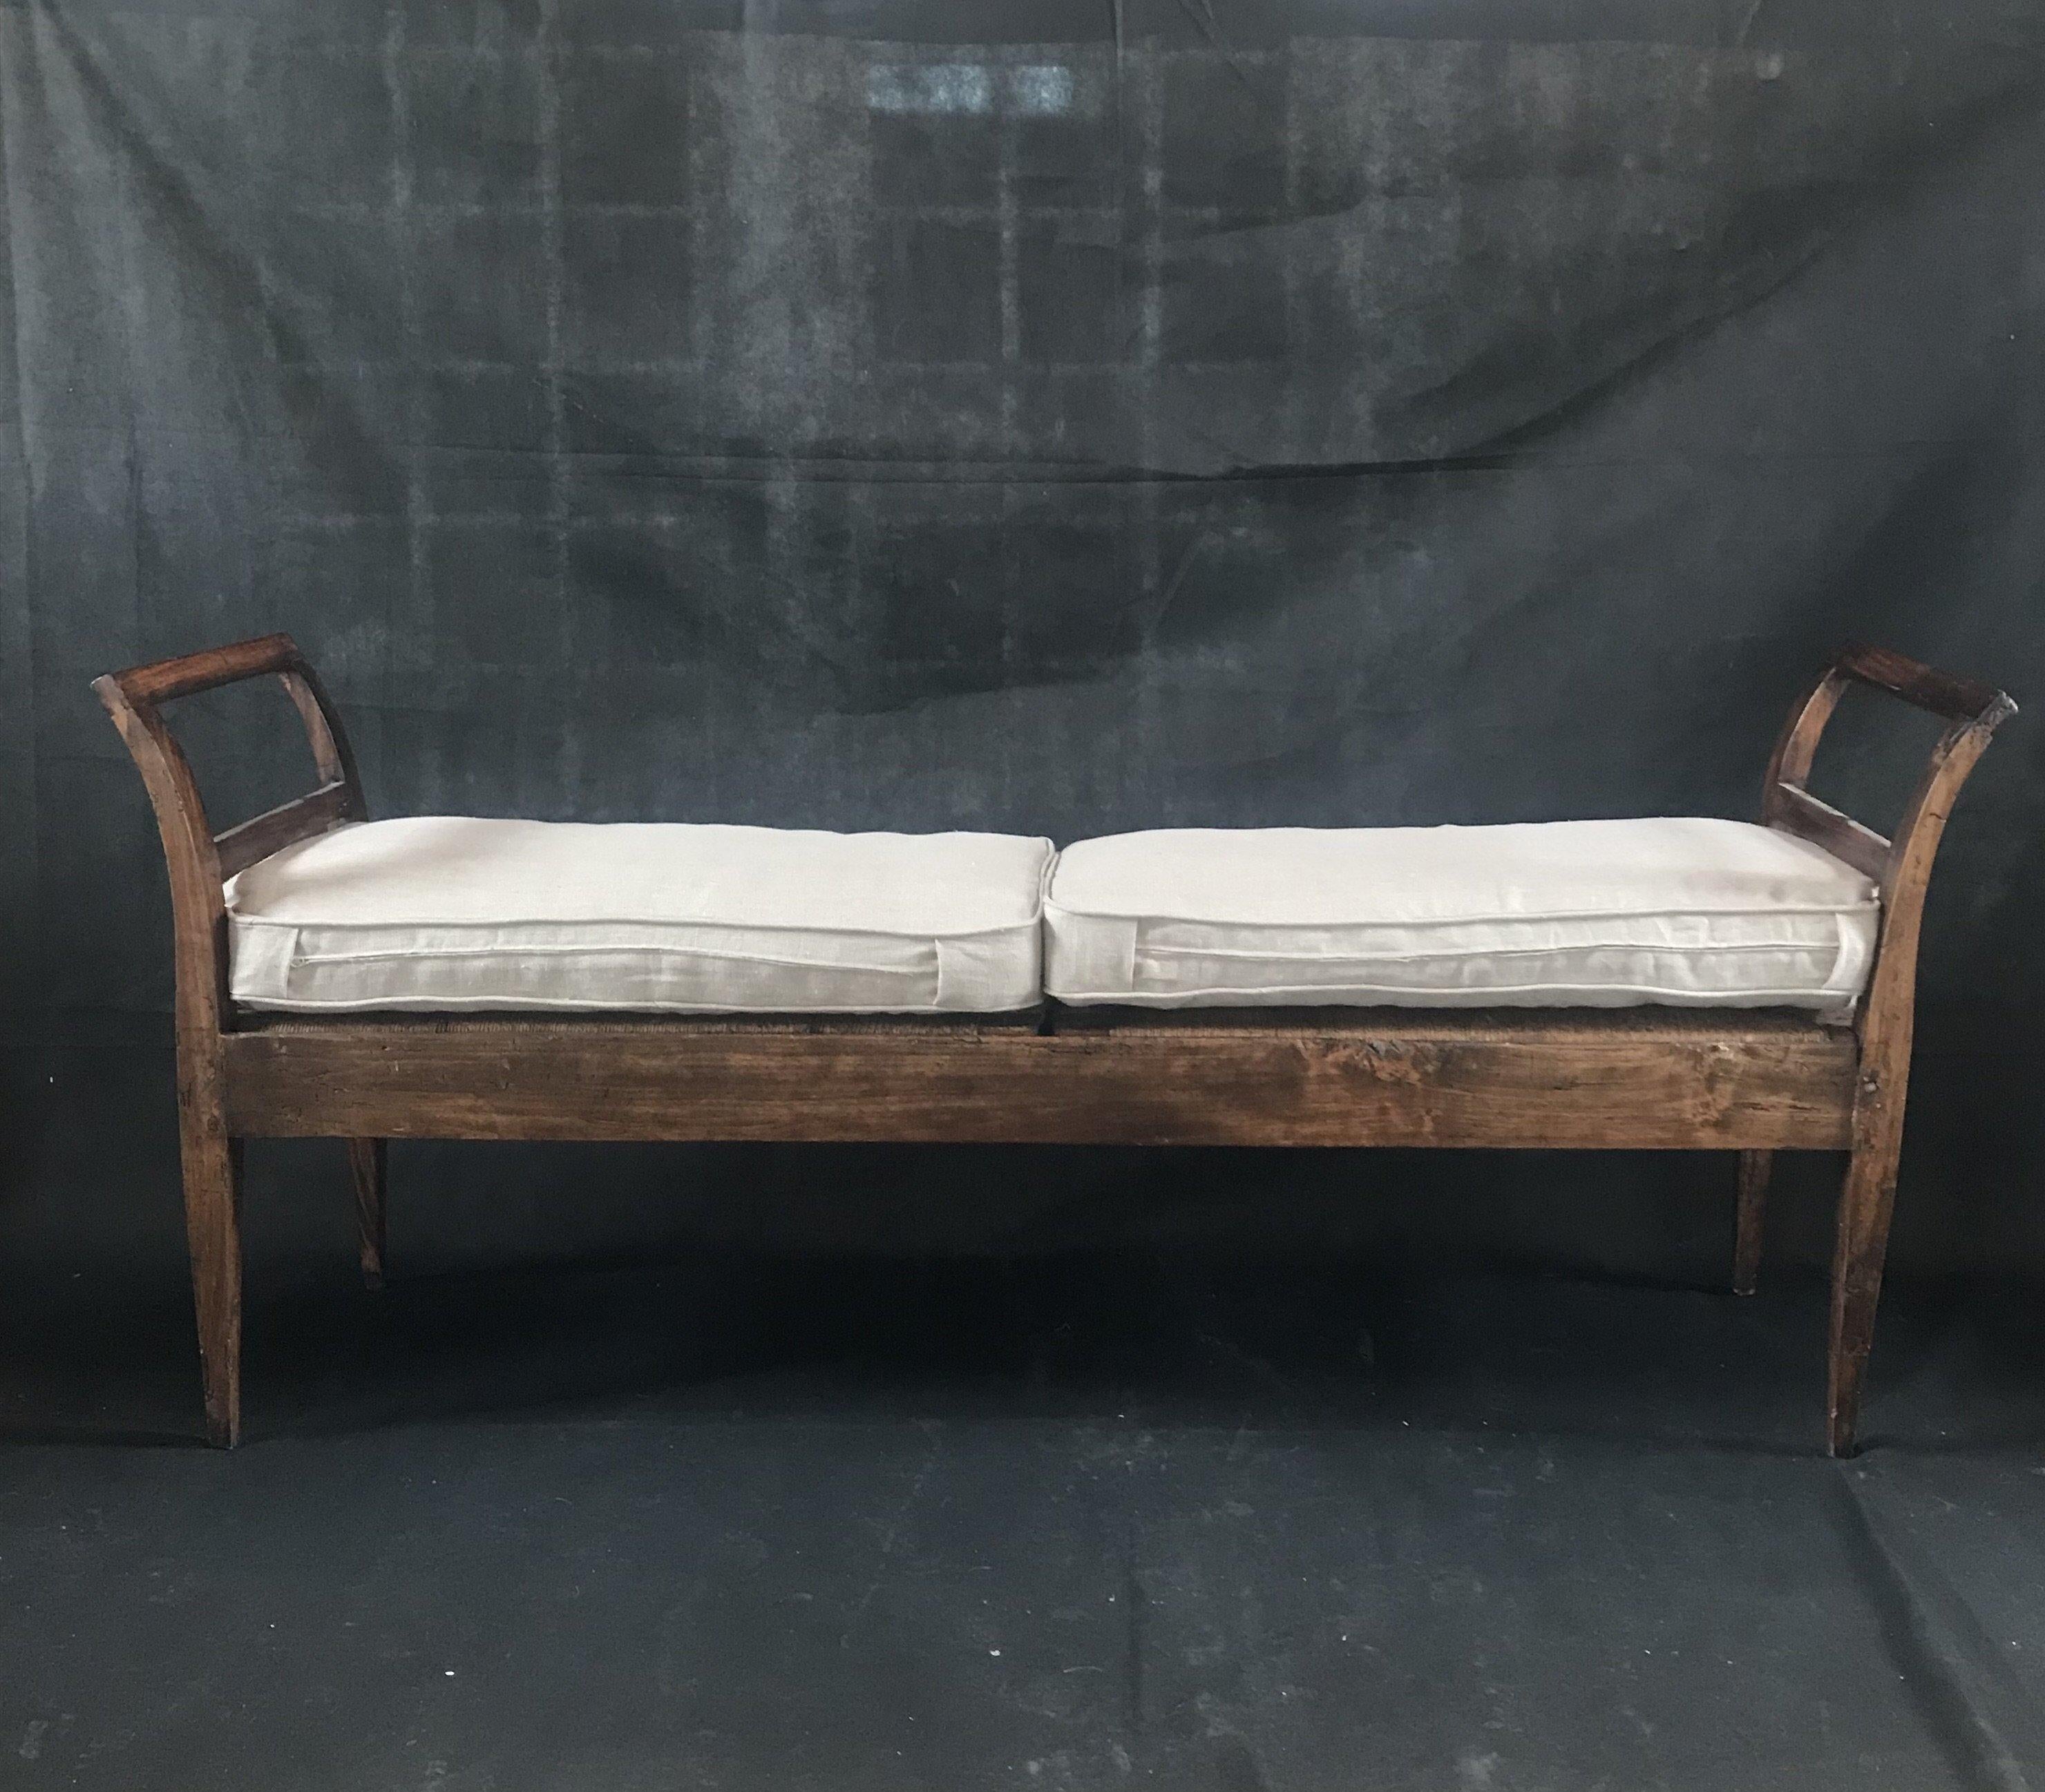 A very long elegant yet rustic 19th century Italian rattan bench from Arezzo, Italy with new beige linen cotton piped seat pillows.
#3033

Measure: H to seat 18”.